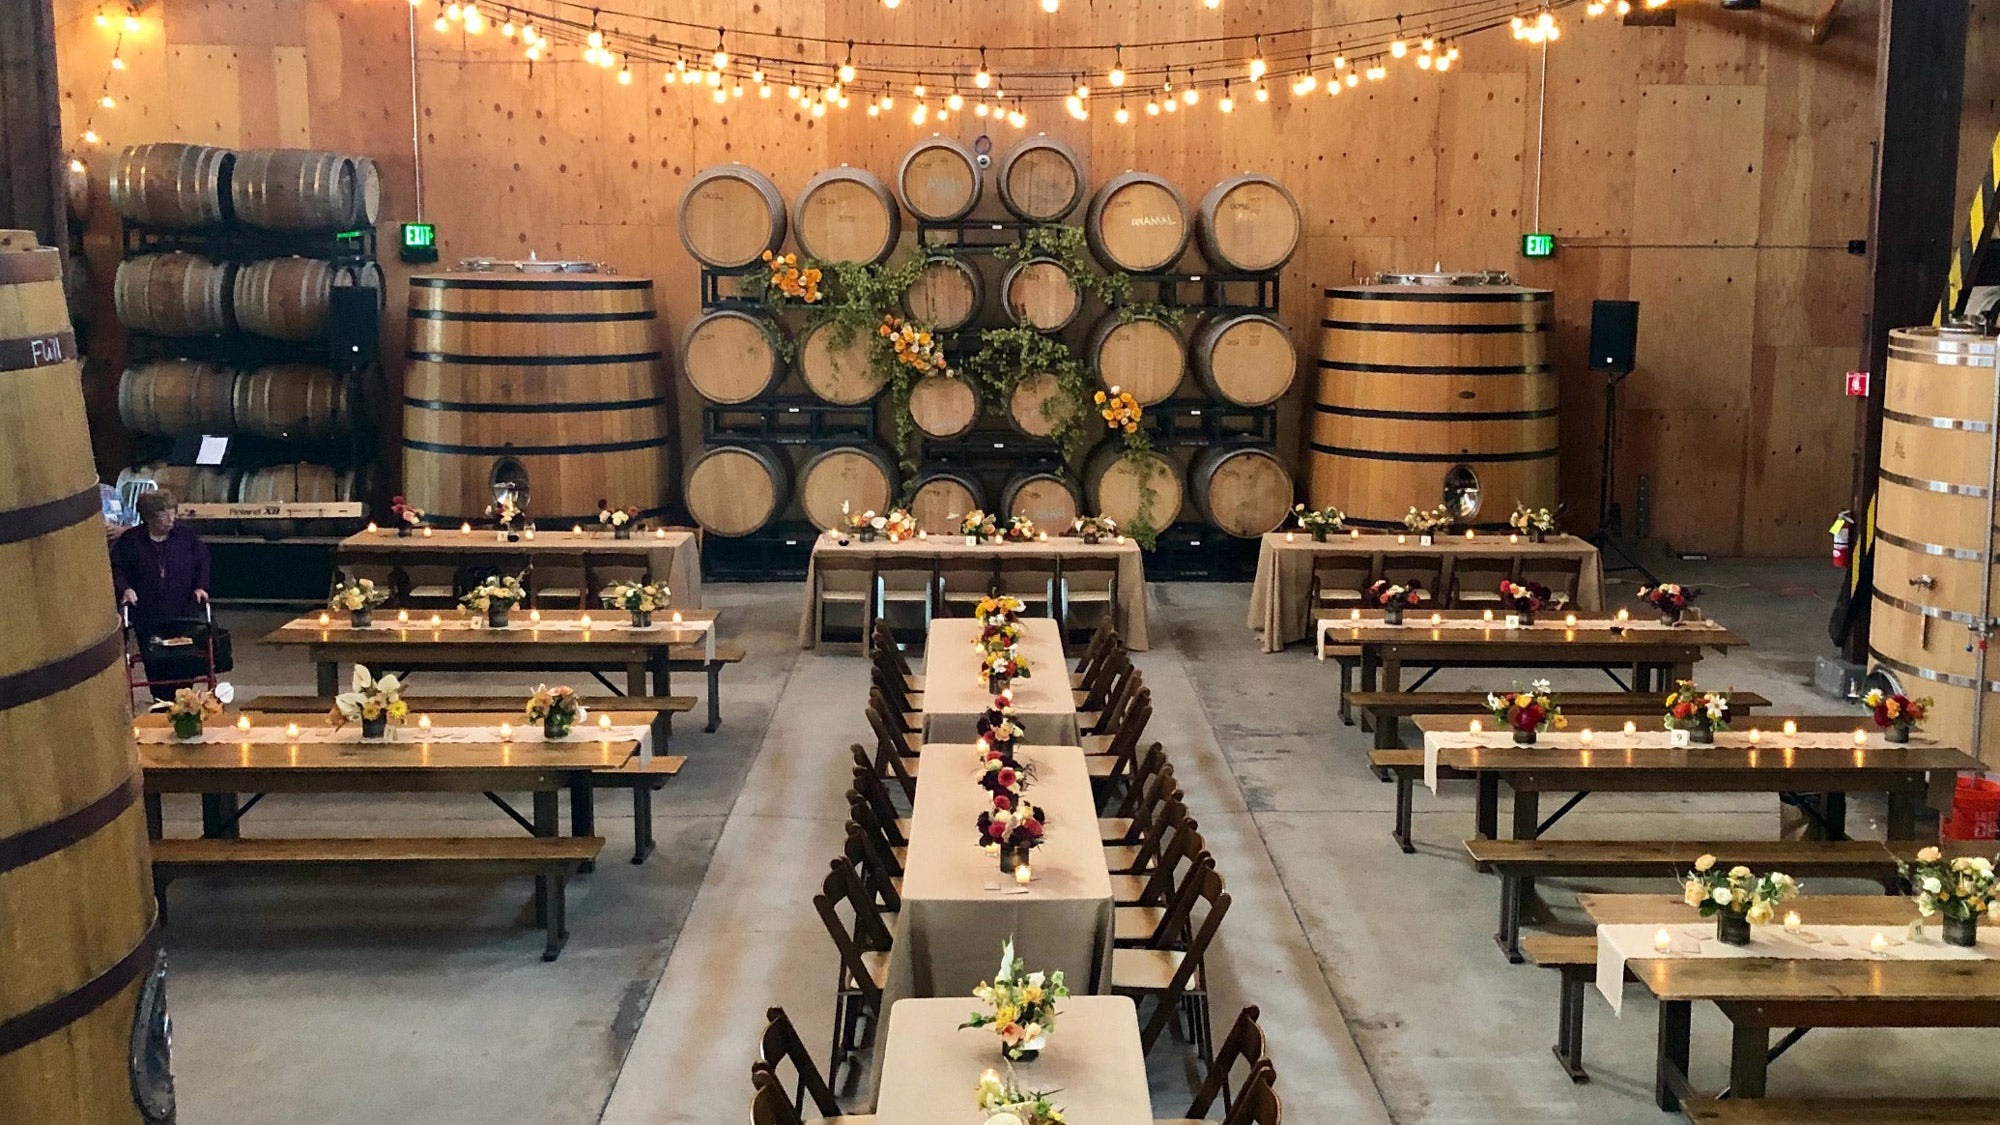 Barrel Hall - Private Event Rental Space at Almanac Brewery